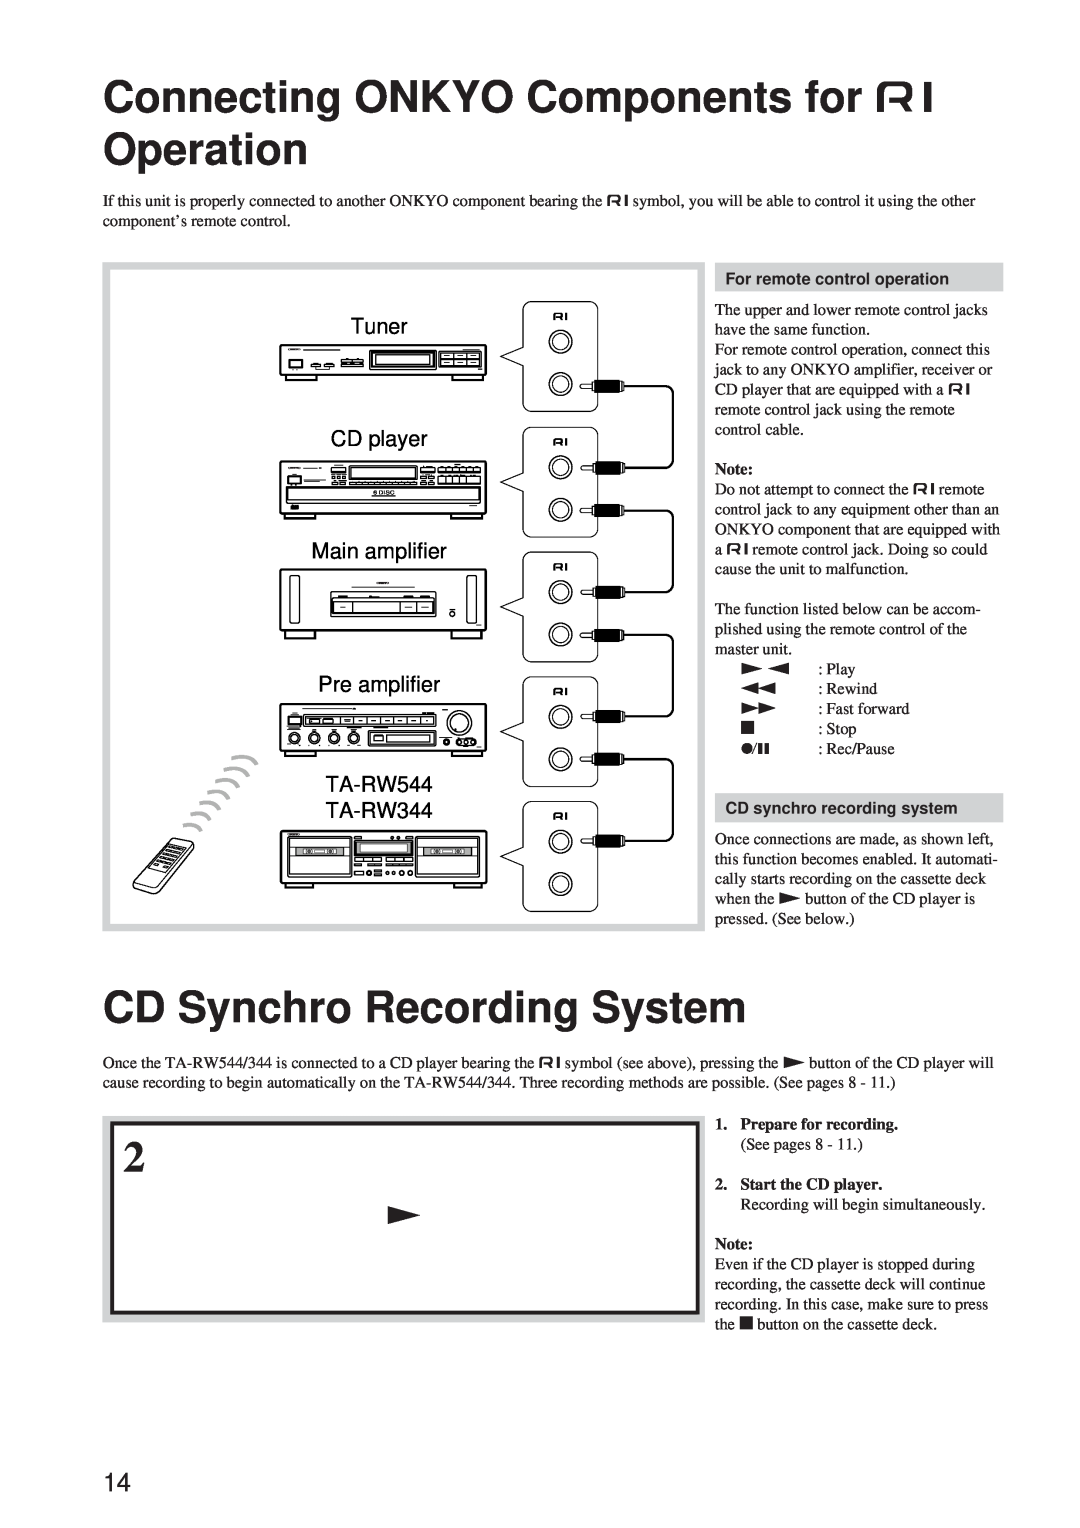 Onkyo TA-RW544, TA-RW344 Connecting ONKYO Components for z Operation, CD Synchro Recording System, Tuner CD player 